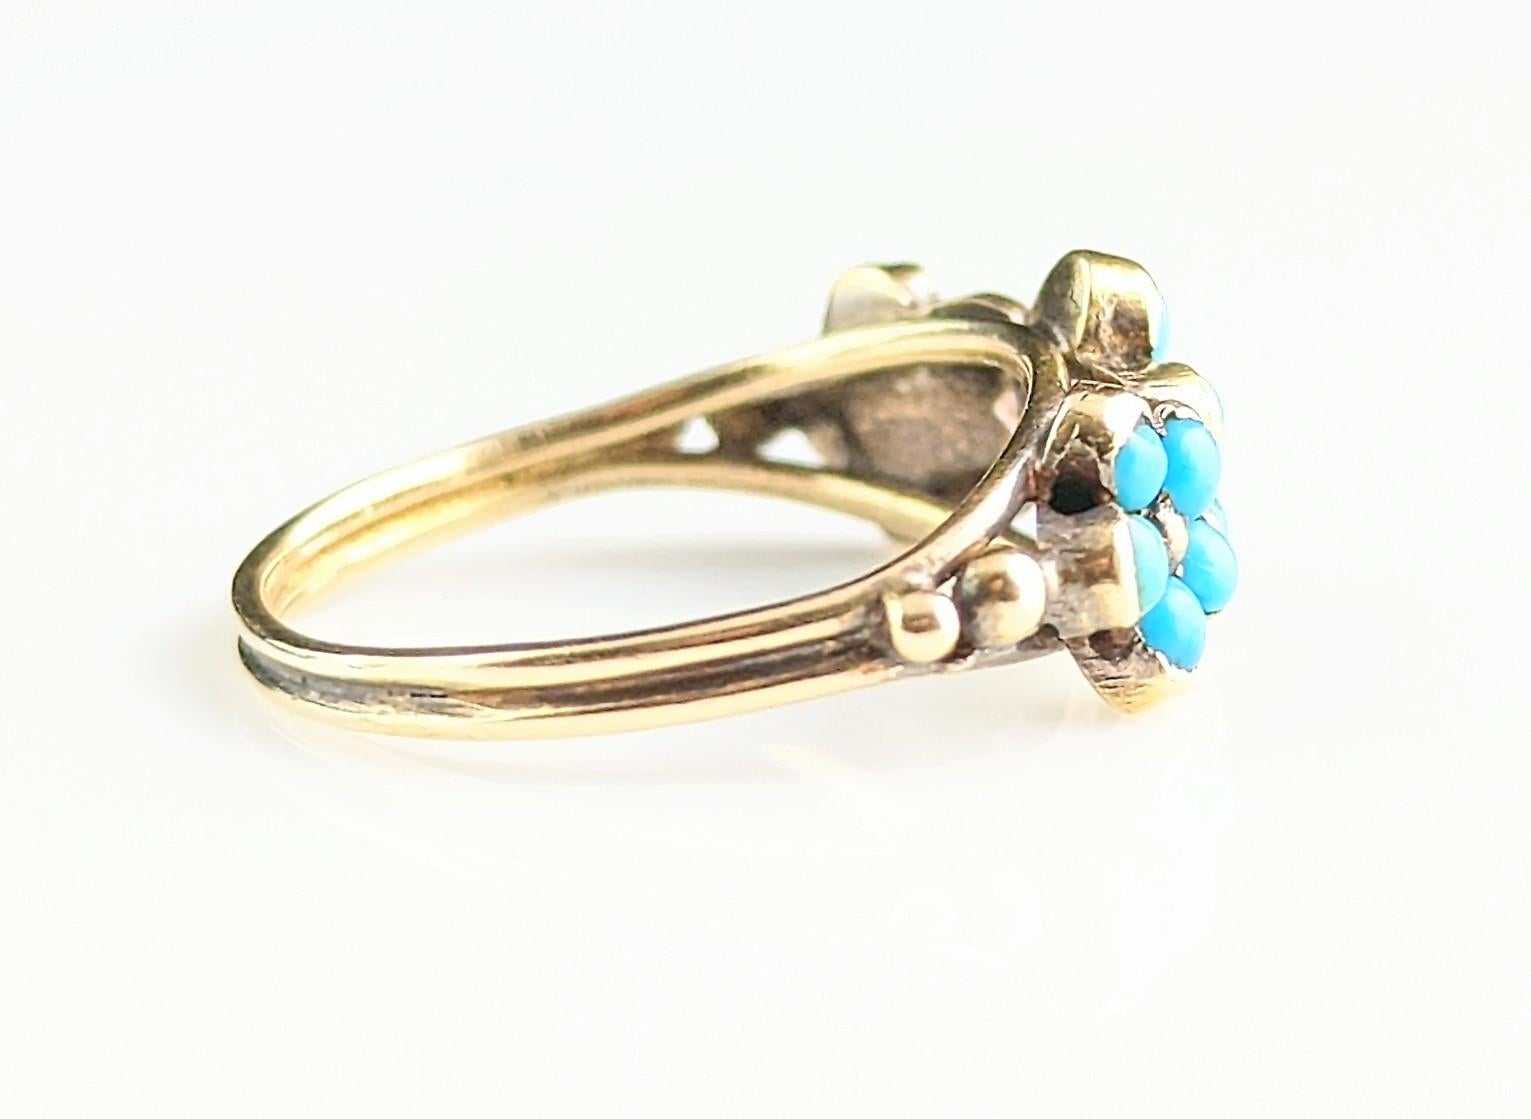 Antique Georgian Triple Flower Ring, Forget Me Not, 18k Gold and Turquoise 10